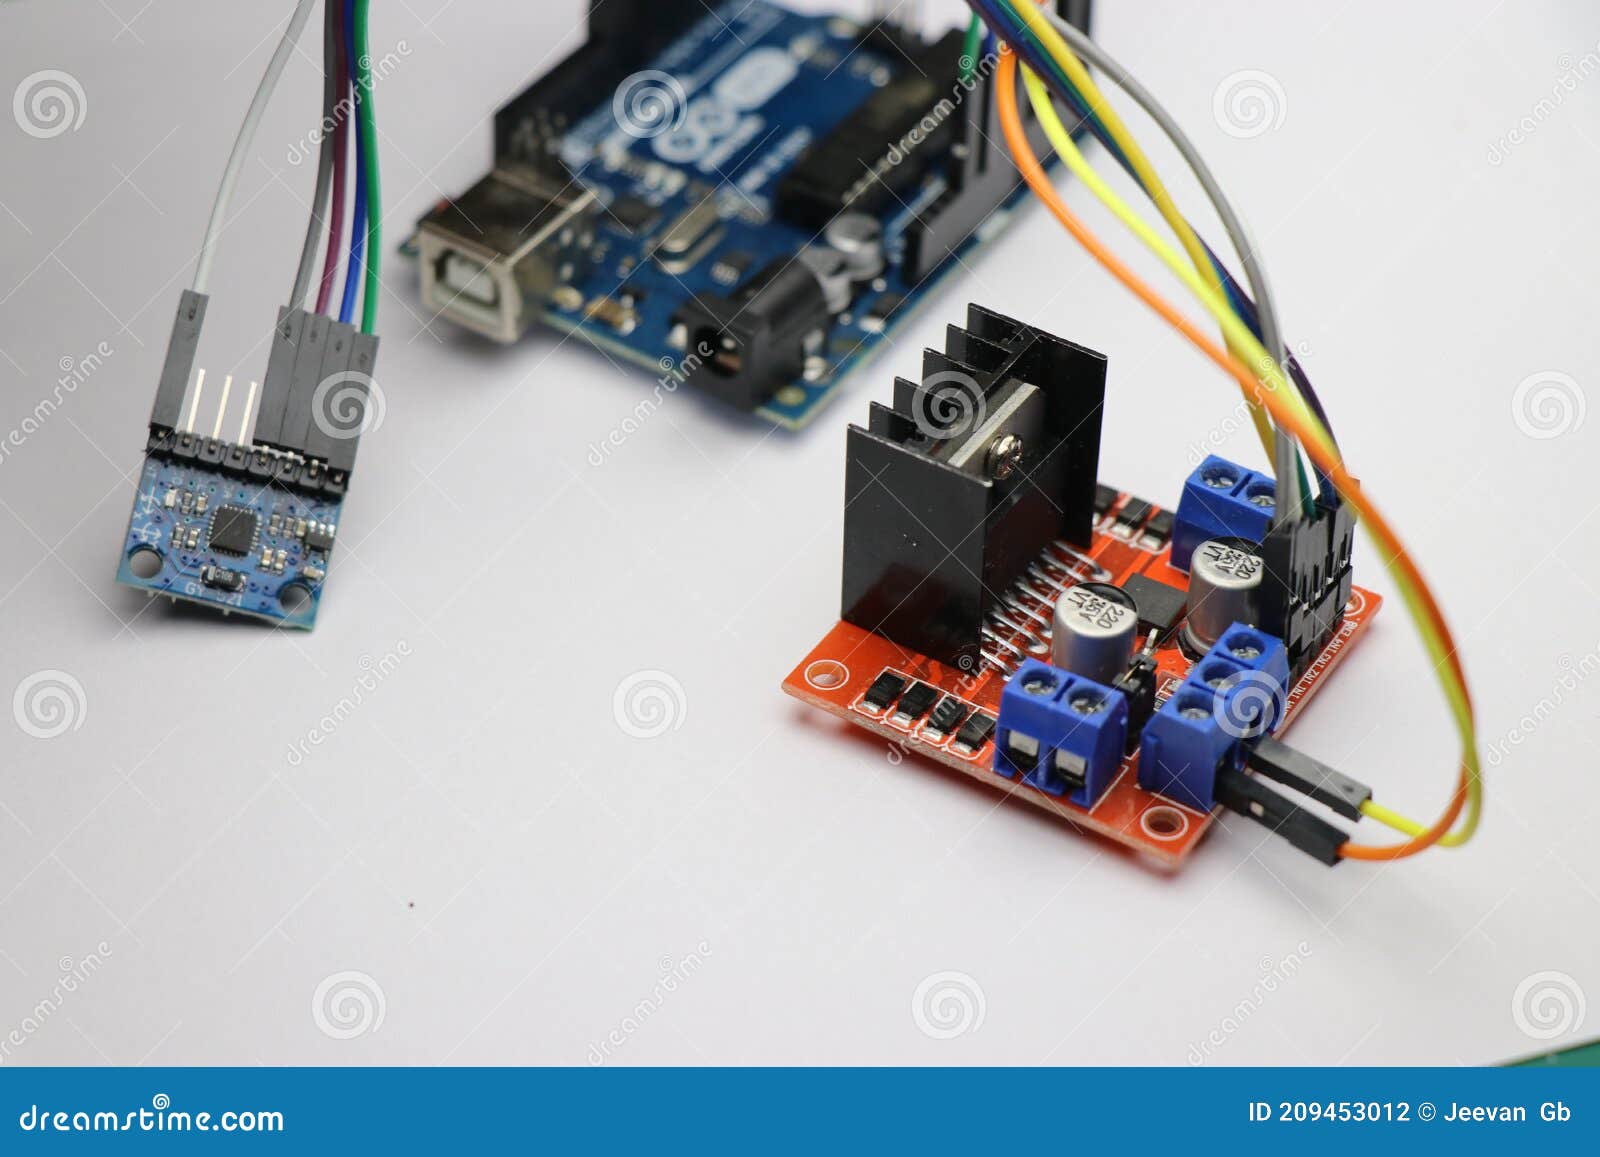 Driver connection with arduino